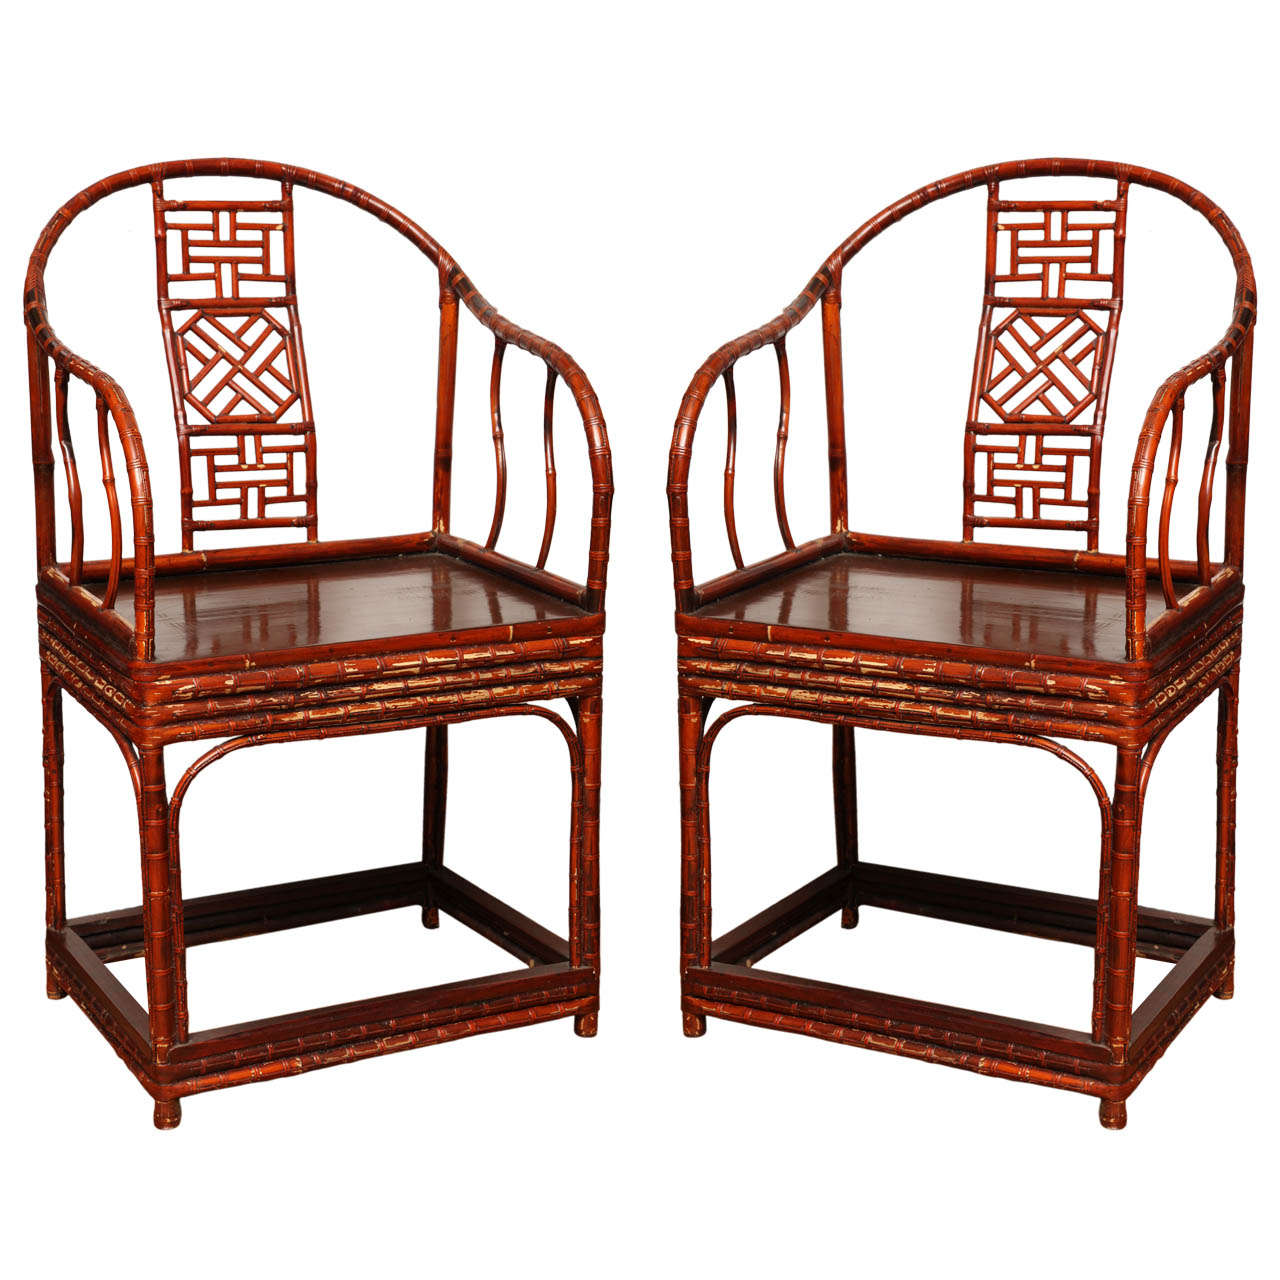 Single 19th Century Chinese Horseshoe-Back Bamboo Armchair with Elm Base For Sale